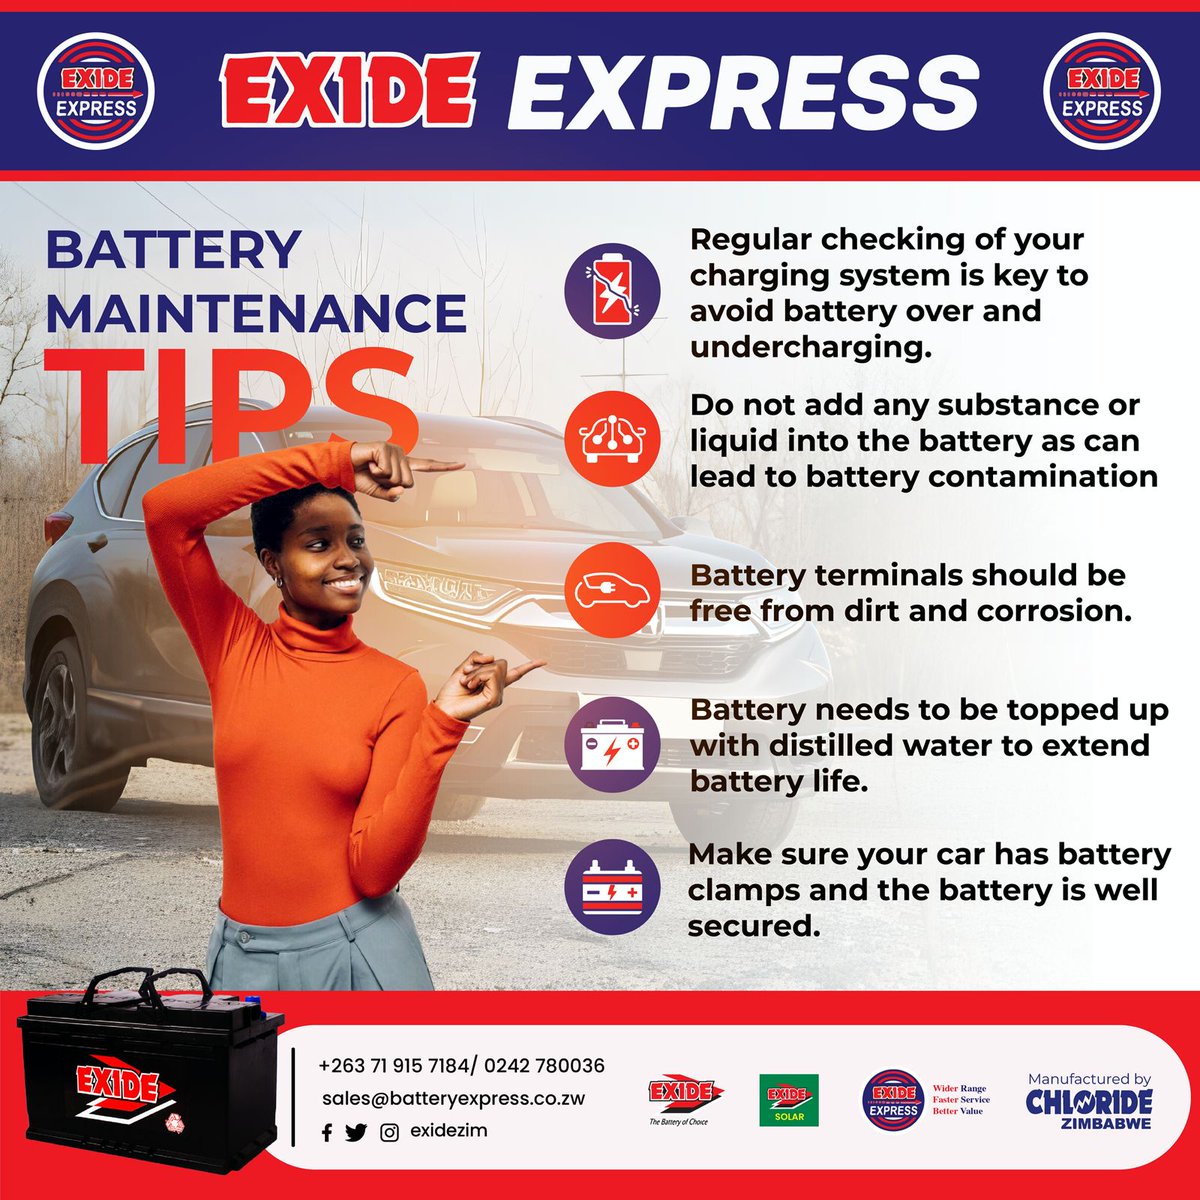 Get the best out of every battery purchase from Exide with these battery maintenance tips. Battery care is essential for you. #thebatteryofchoice @Mavhure @KUDZIELISTER2 @takemorem1 @IdeasZaka @EsteemComms @alickmacheso3